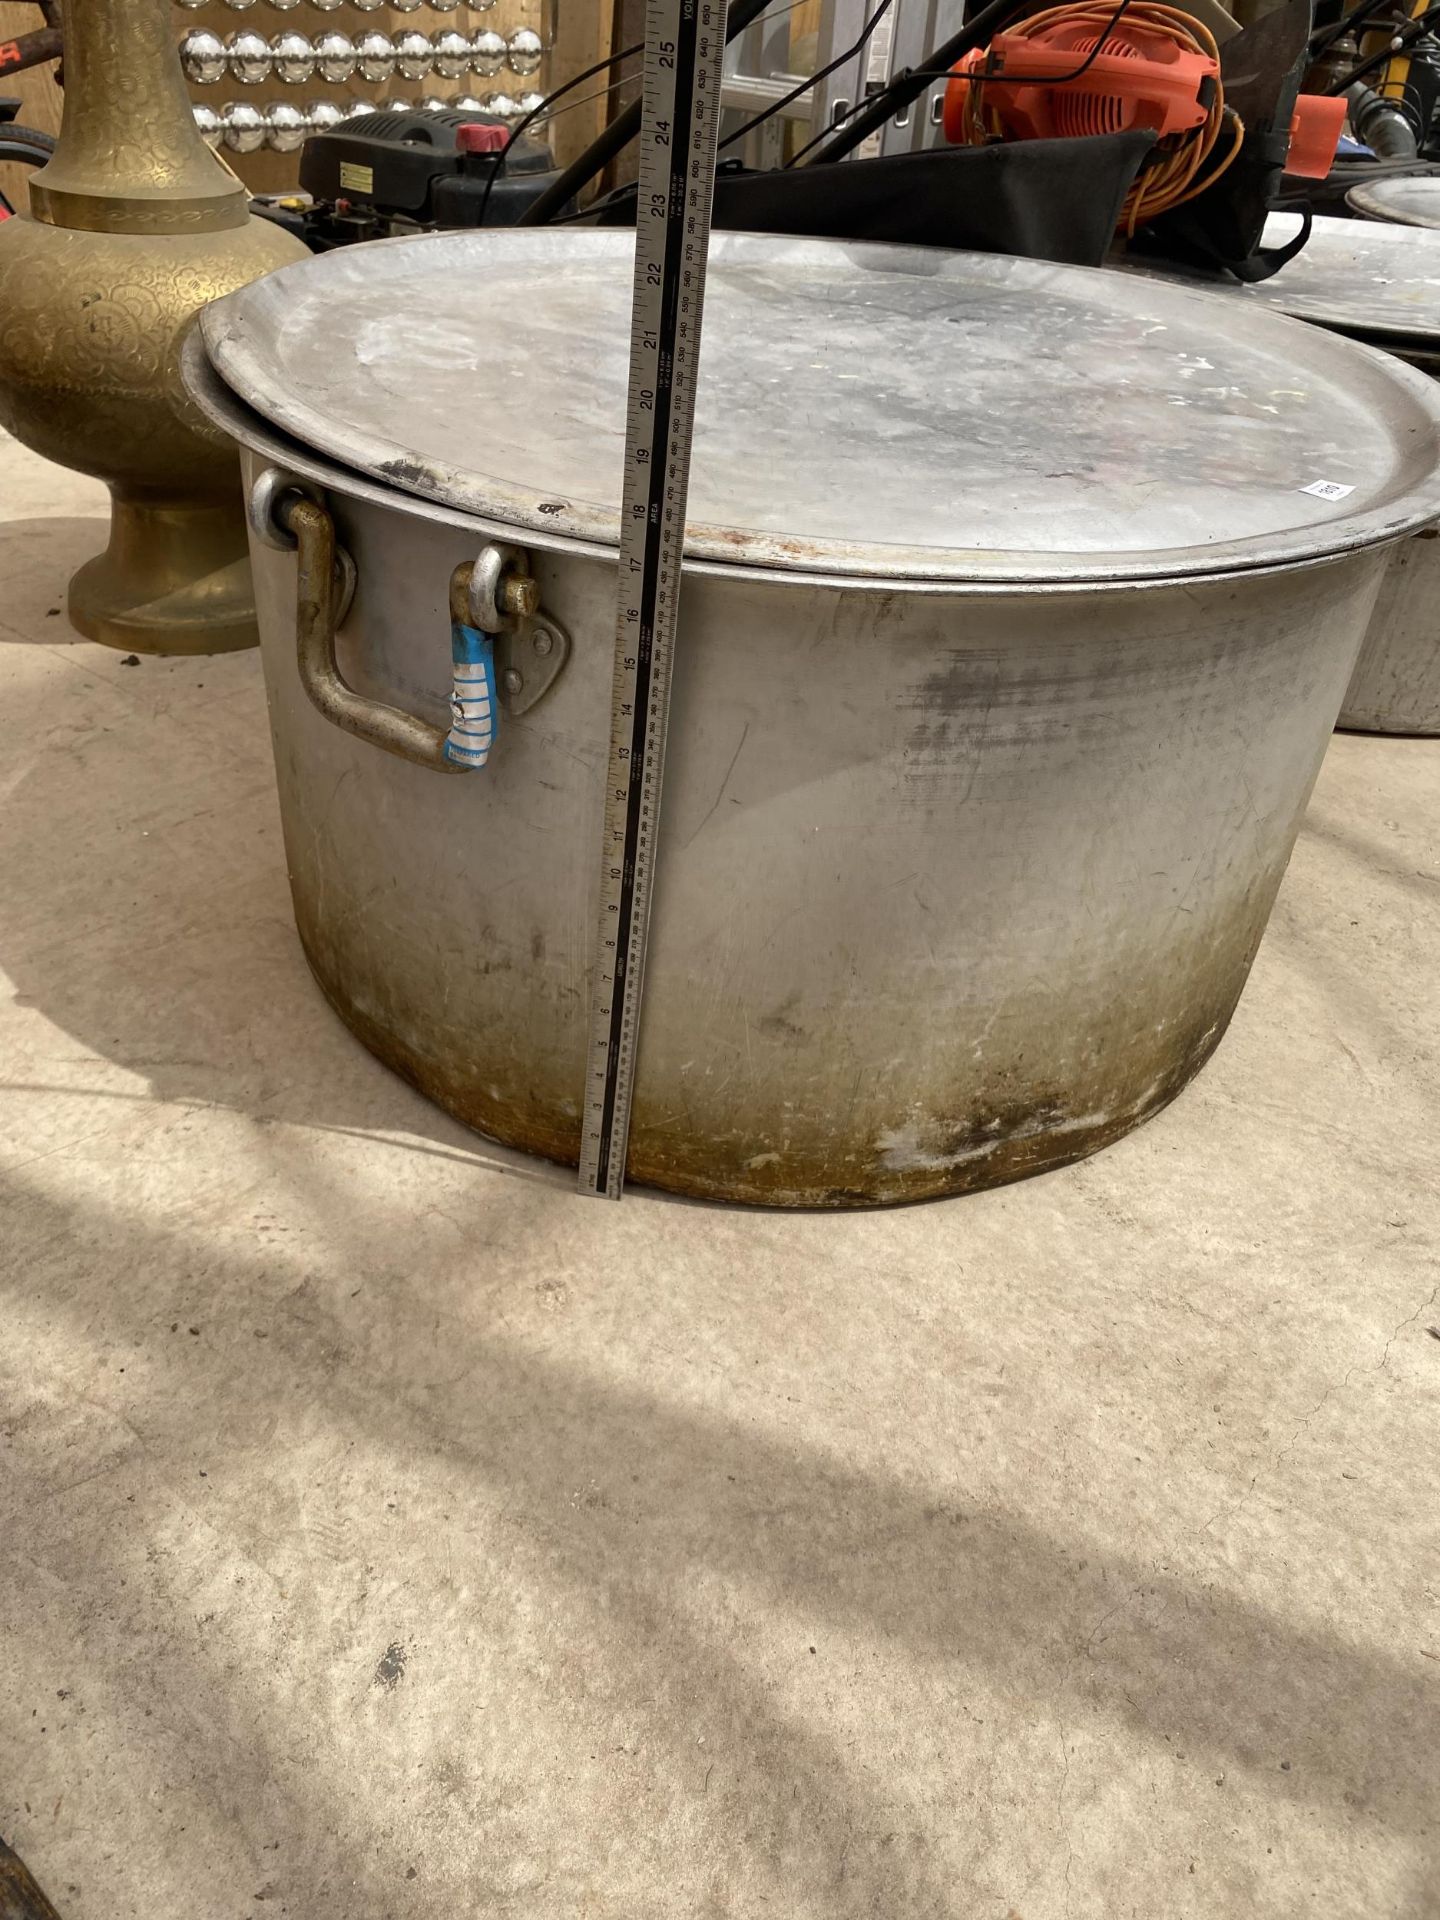 A VERY LARGE STAINLESS STEEL COOKING POT WITH LID - Image 3 of 3